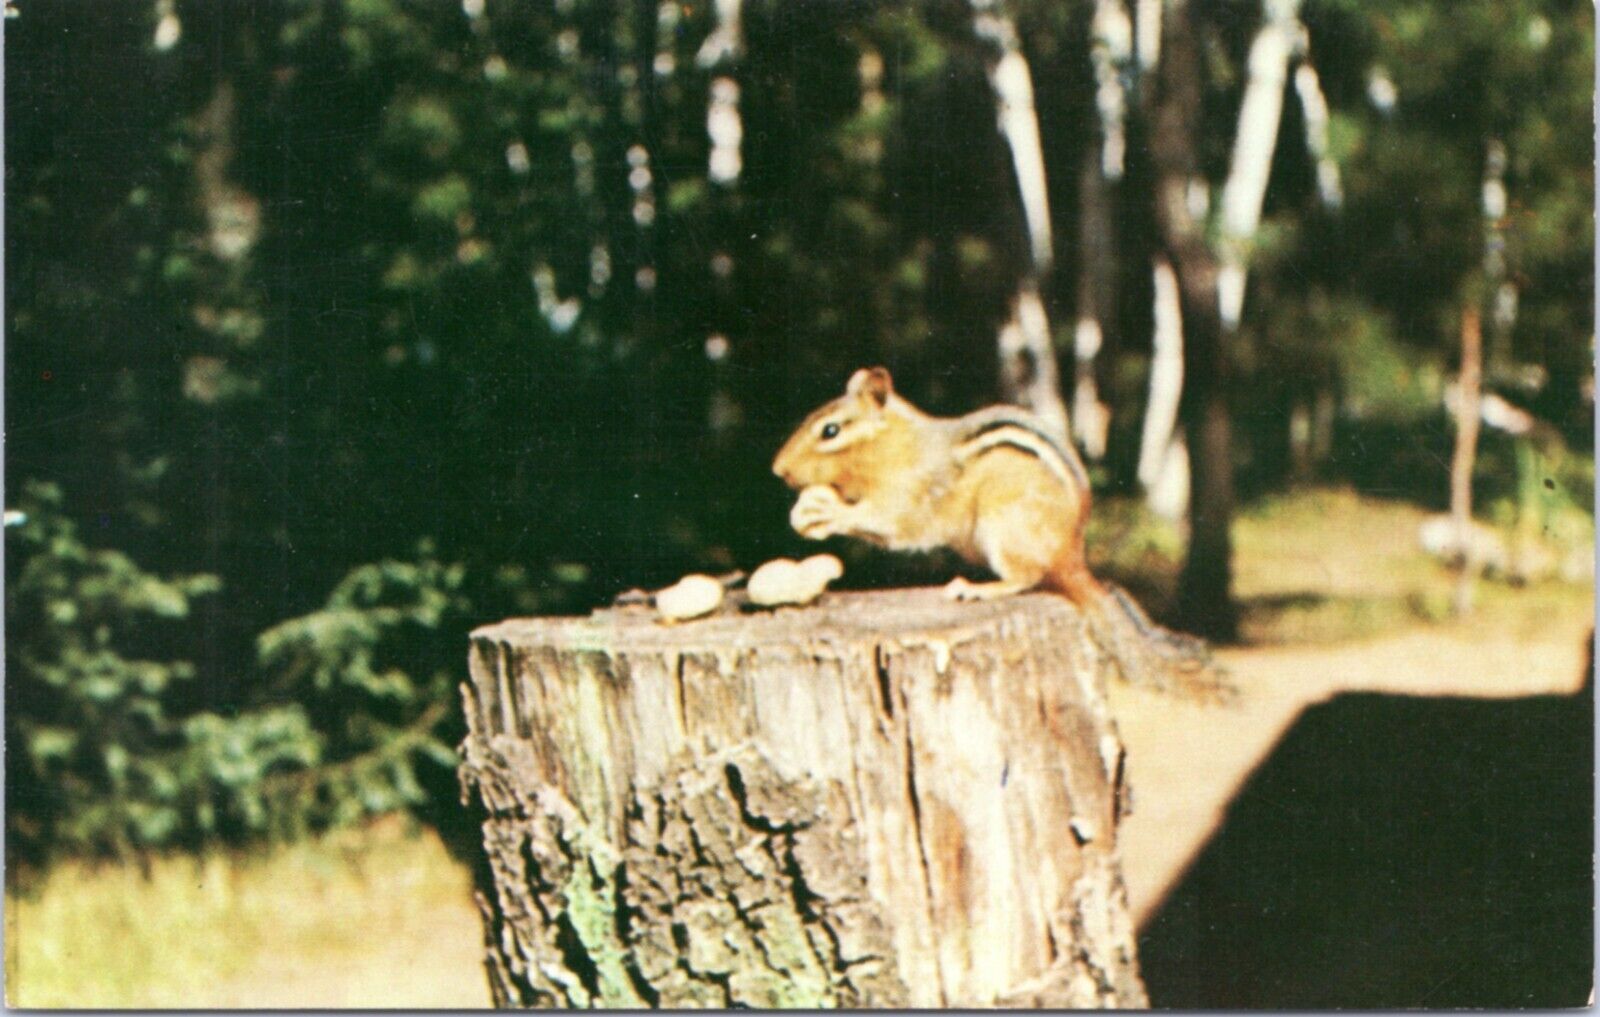 Postcard MN Greetings from Cohasset Minnesota - Chipmunk eating nuts on stump